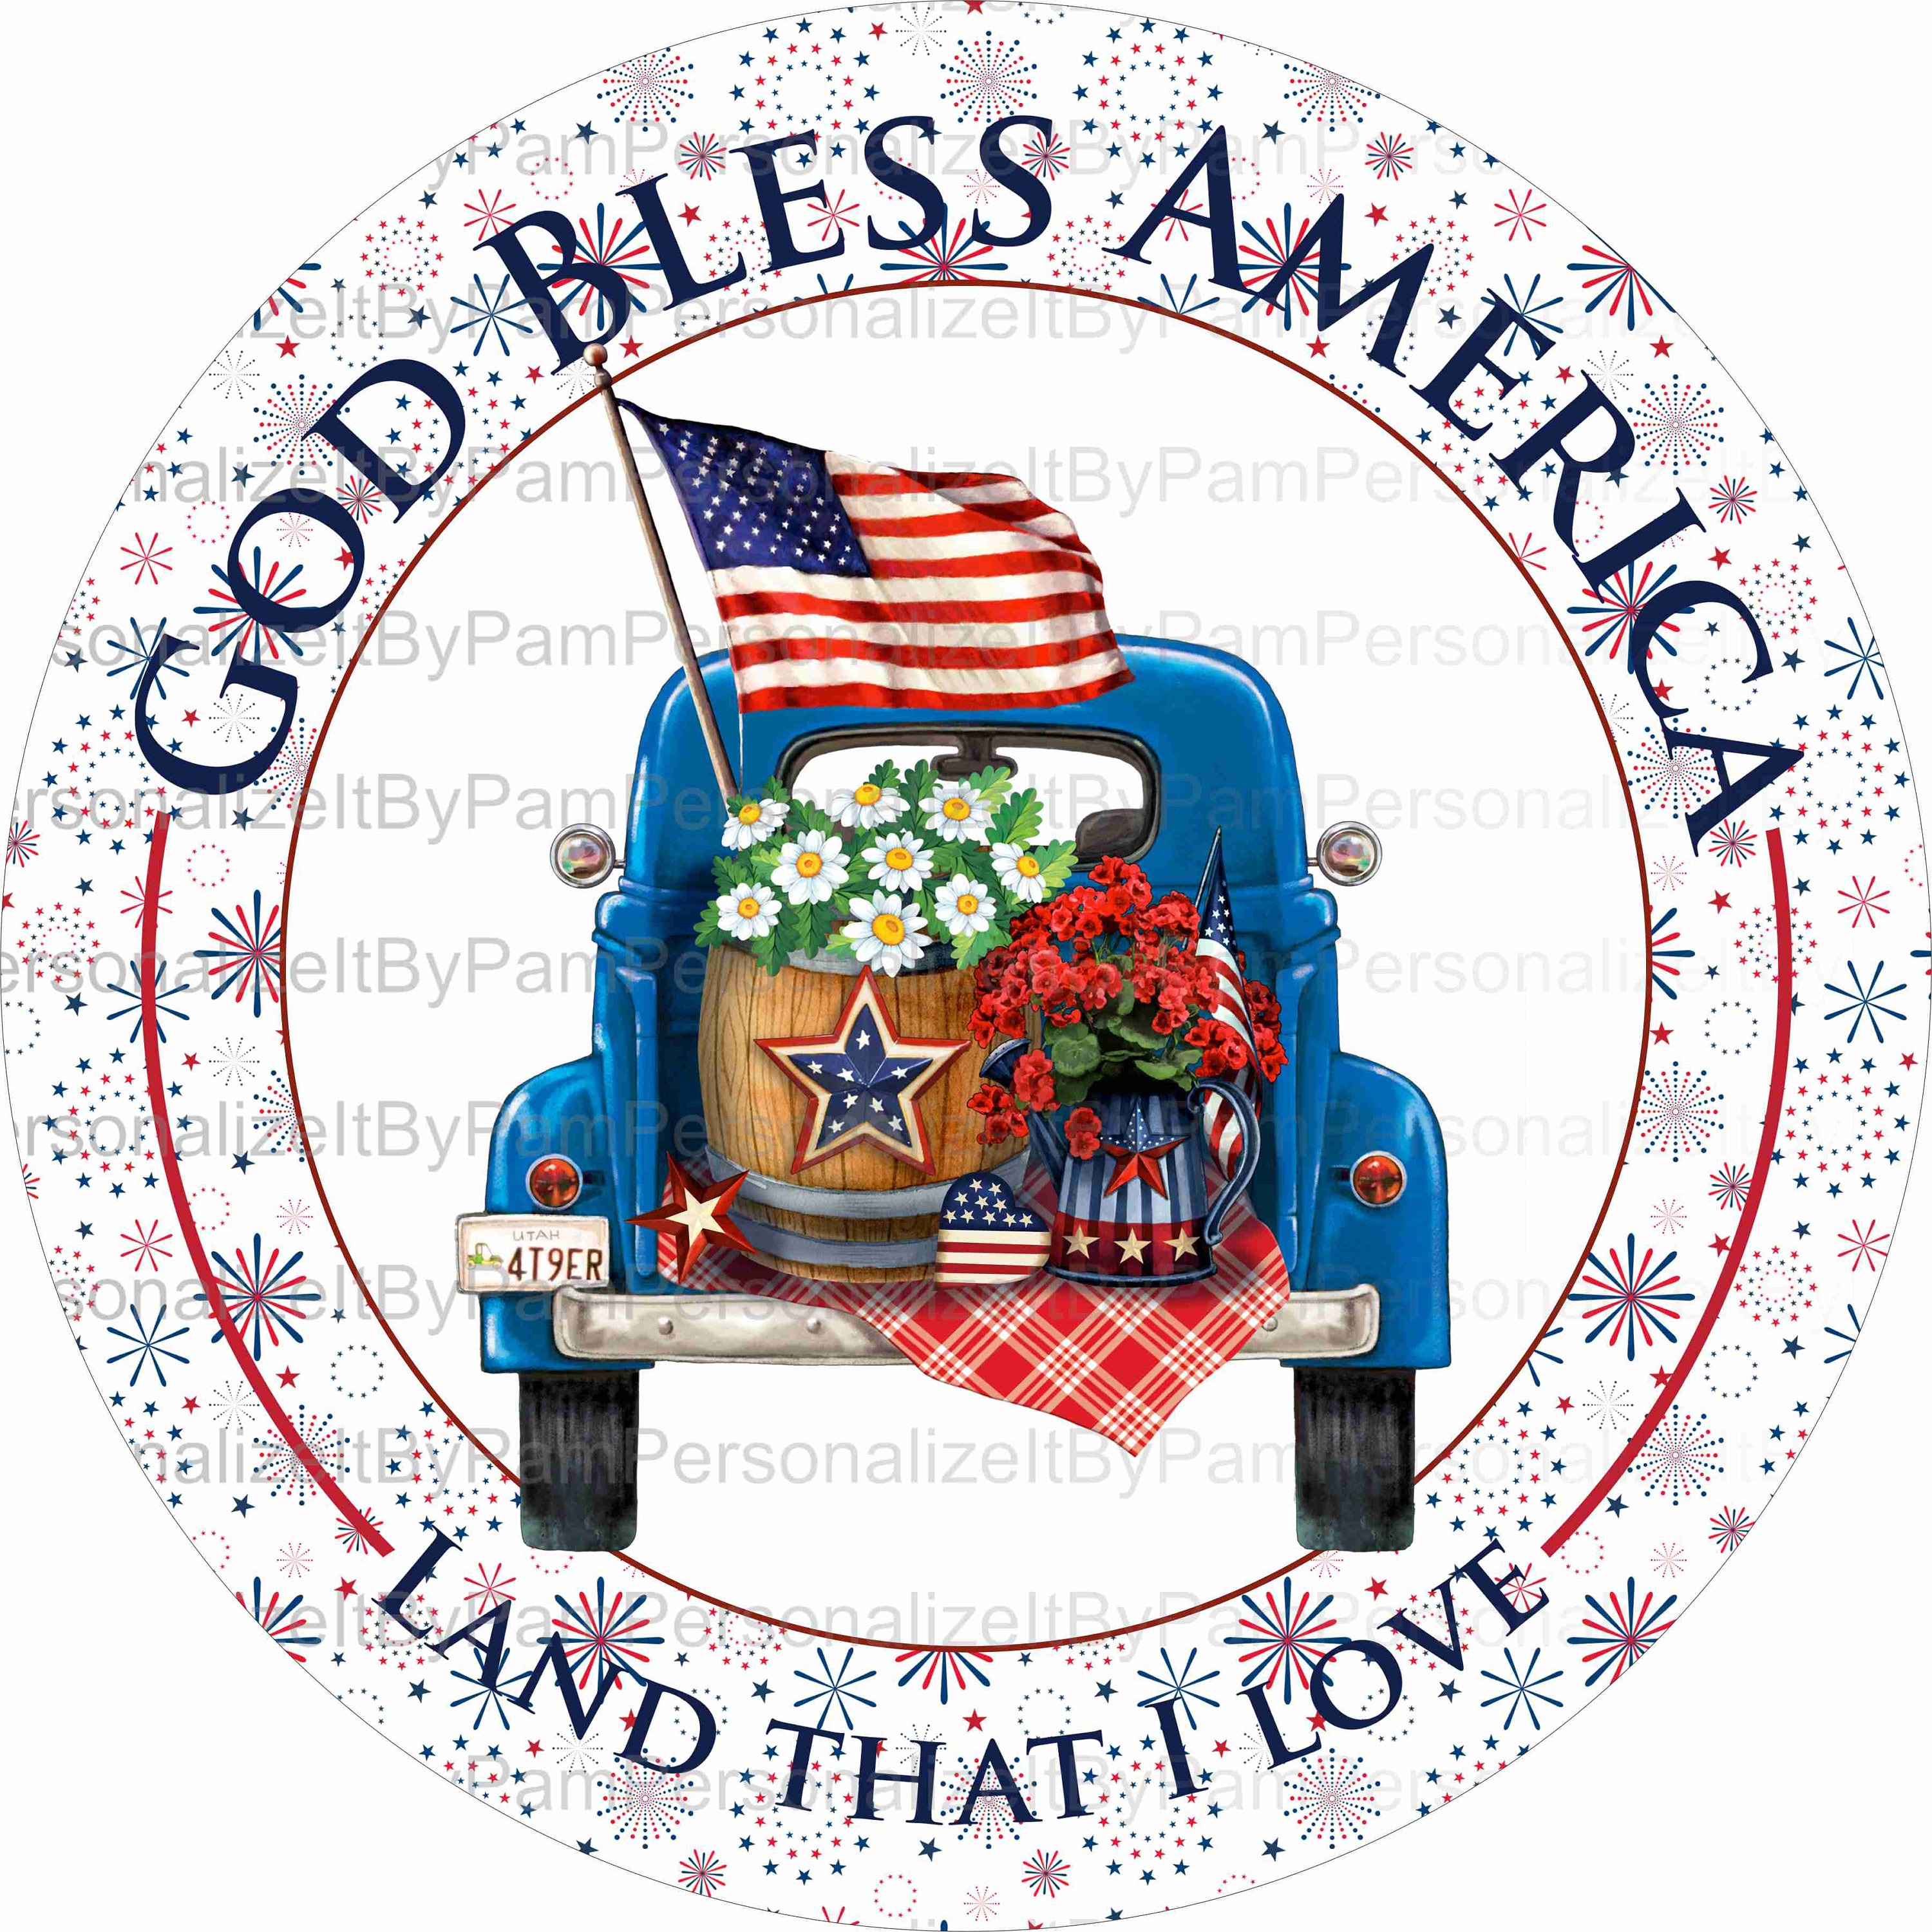 Personalize it by Pam 10 Round God Bless America Wreath Sign Door Decor Patriotic Wreath Sign Wreath Signs